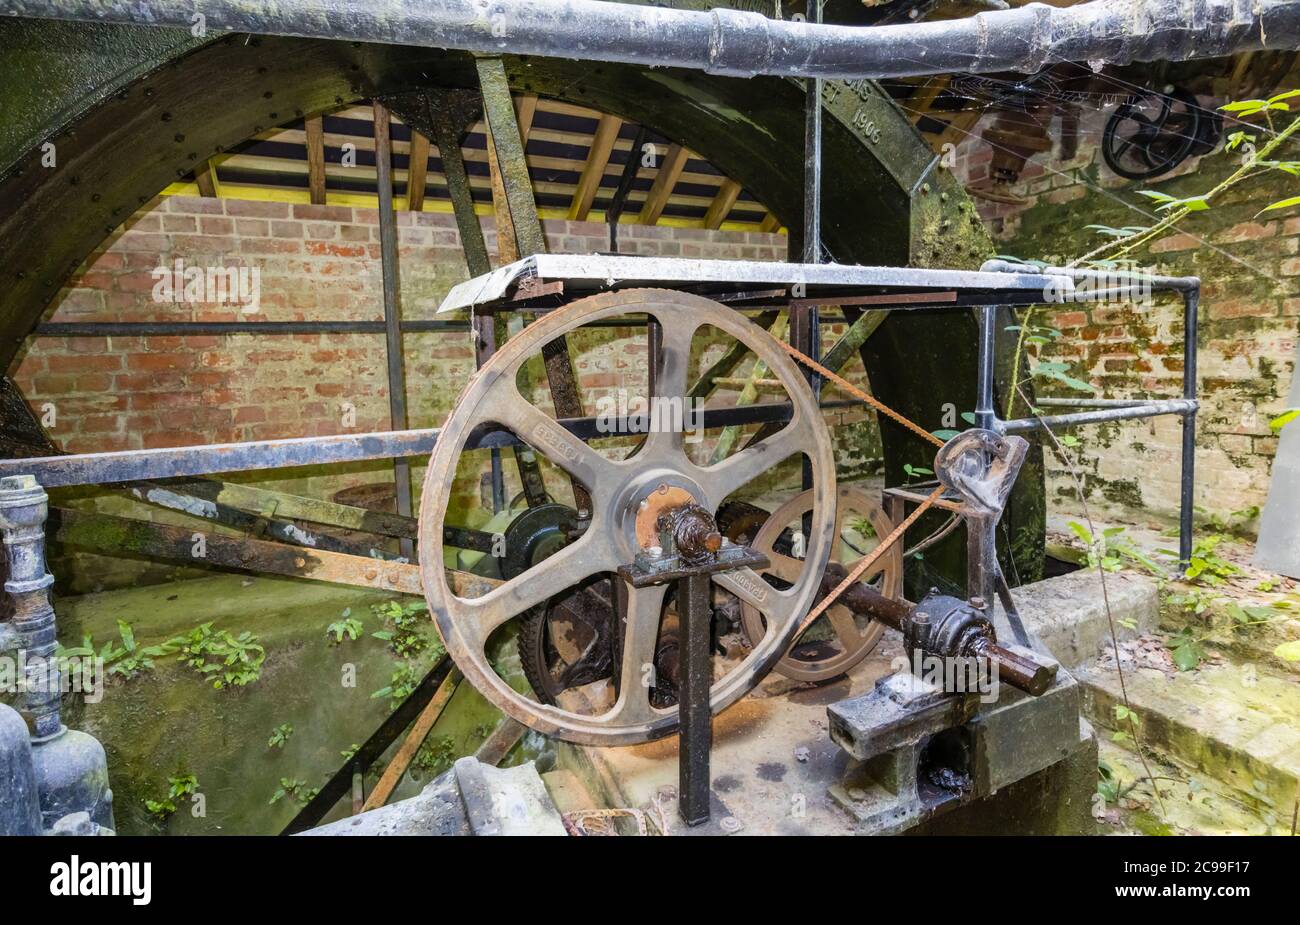 The waterwheel and vintage machinery in the restored Lower Pump House in Stourton, a small village near Stourhead, Wiltshire, south-west England Stock Photo